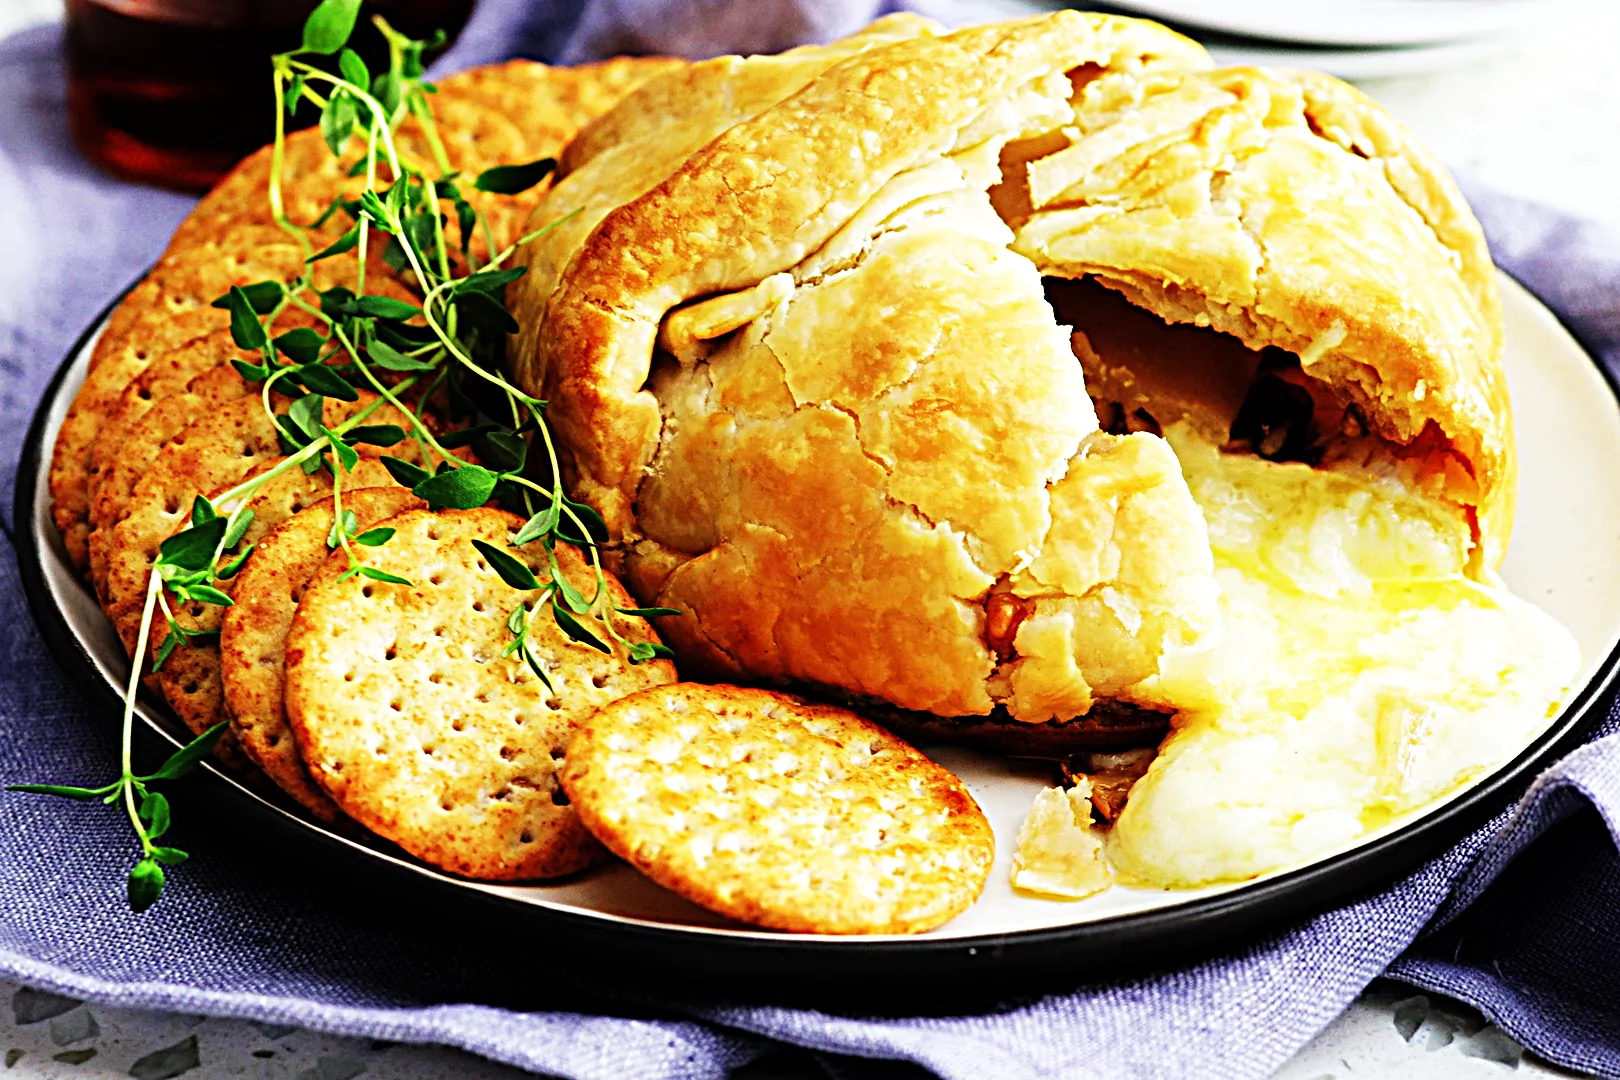 Stupid-Easy Recipe for Baked Brie in Pie Crust (#1 Top-Rated)